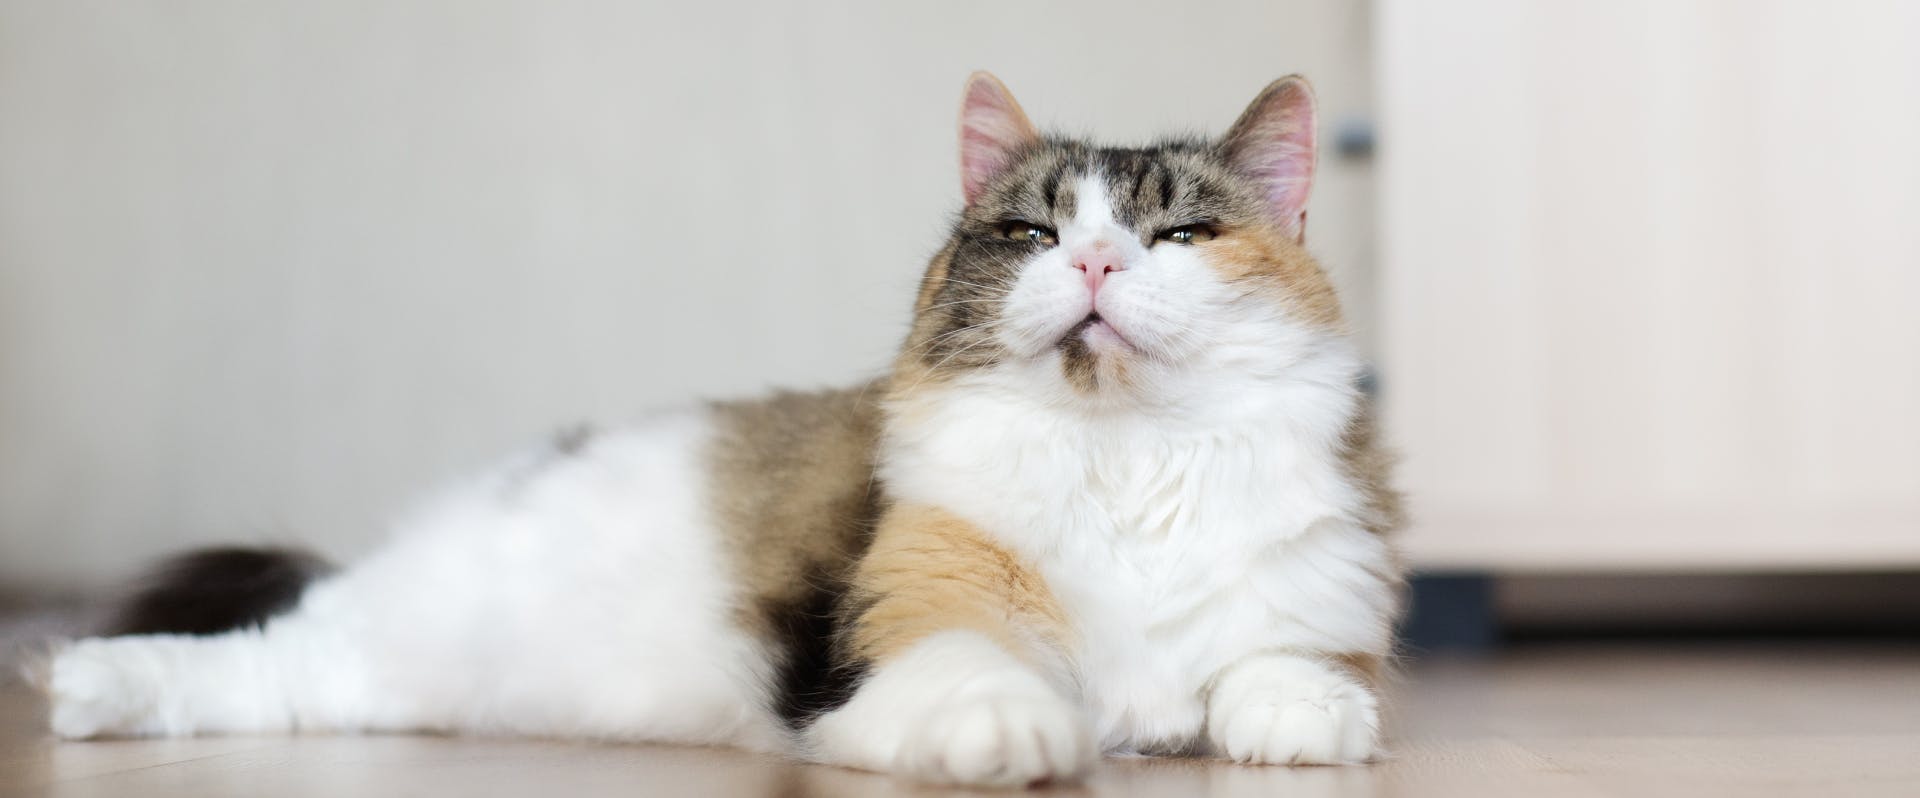 calico cat lying on a kitchen floor squinting